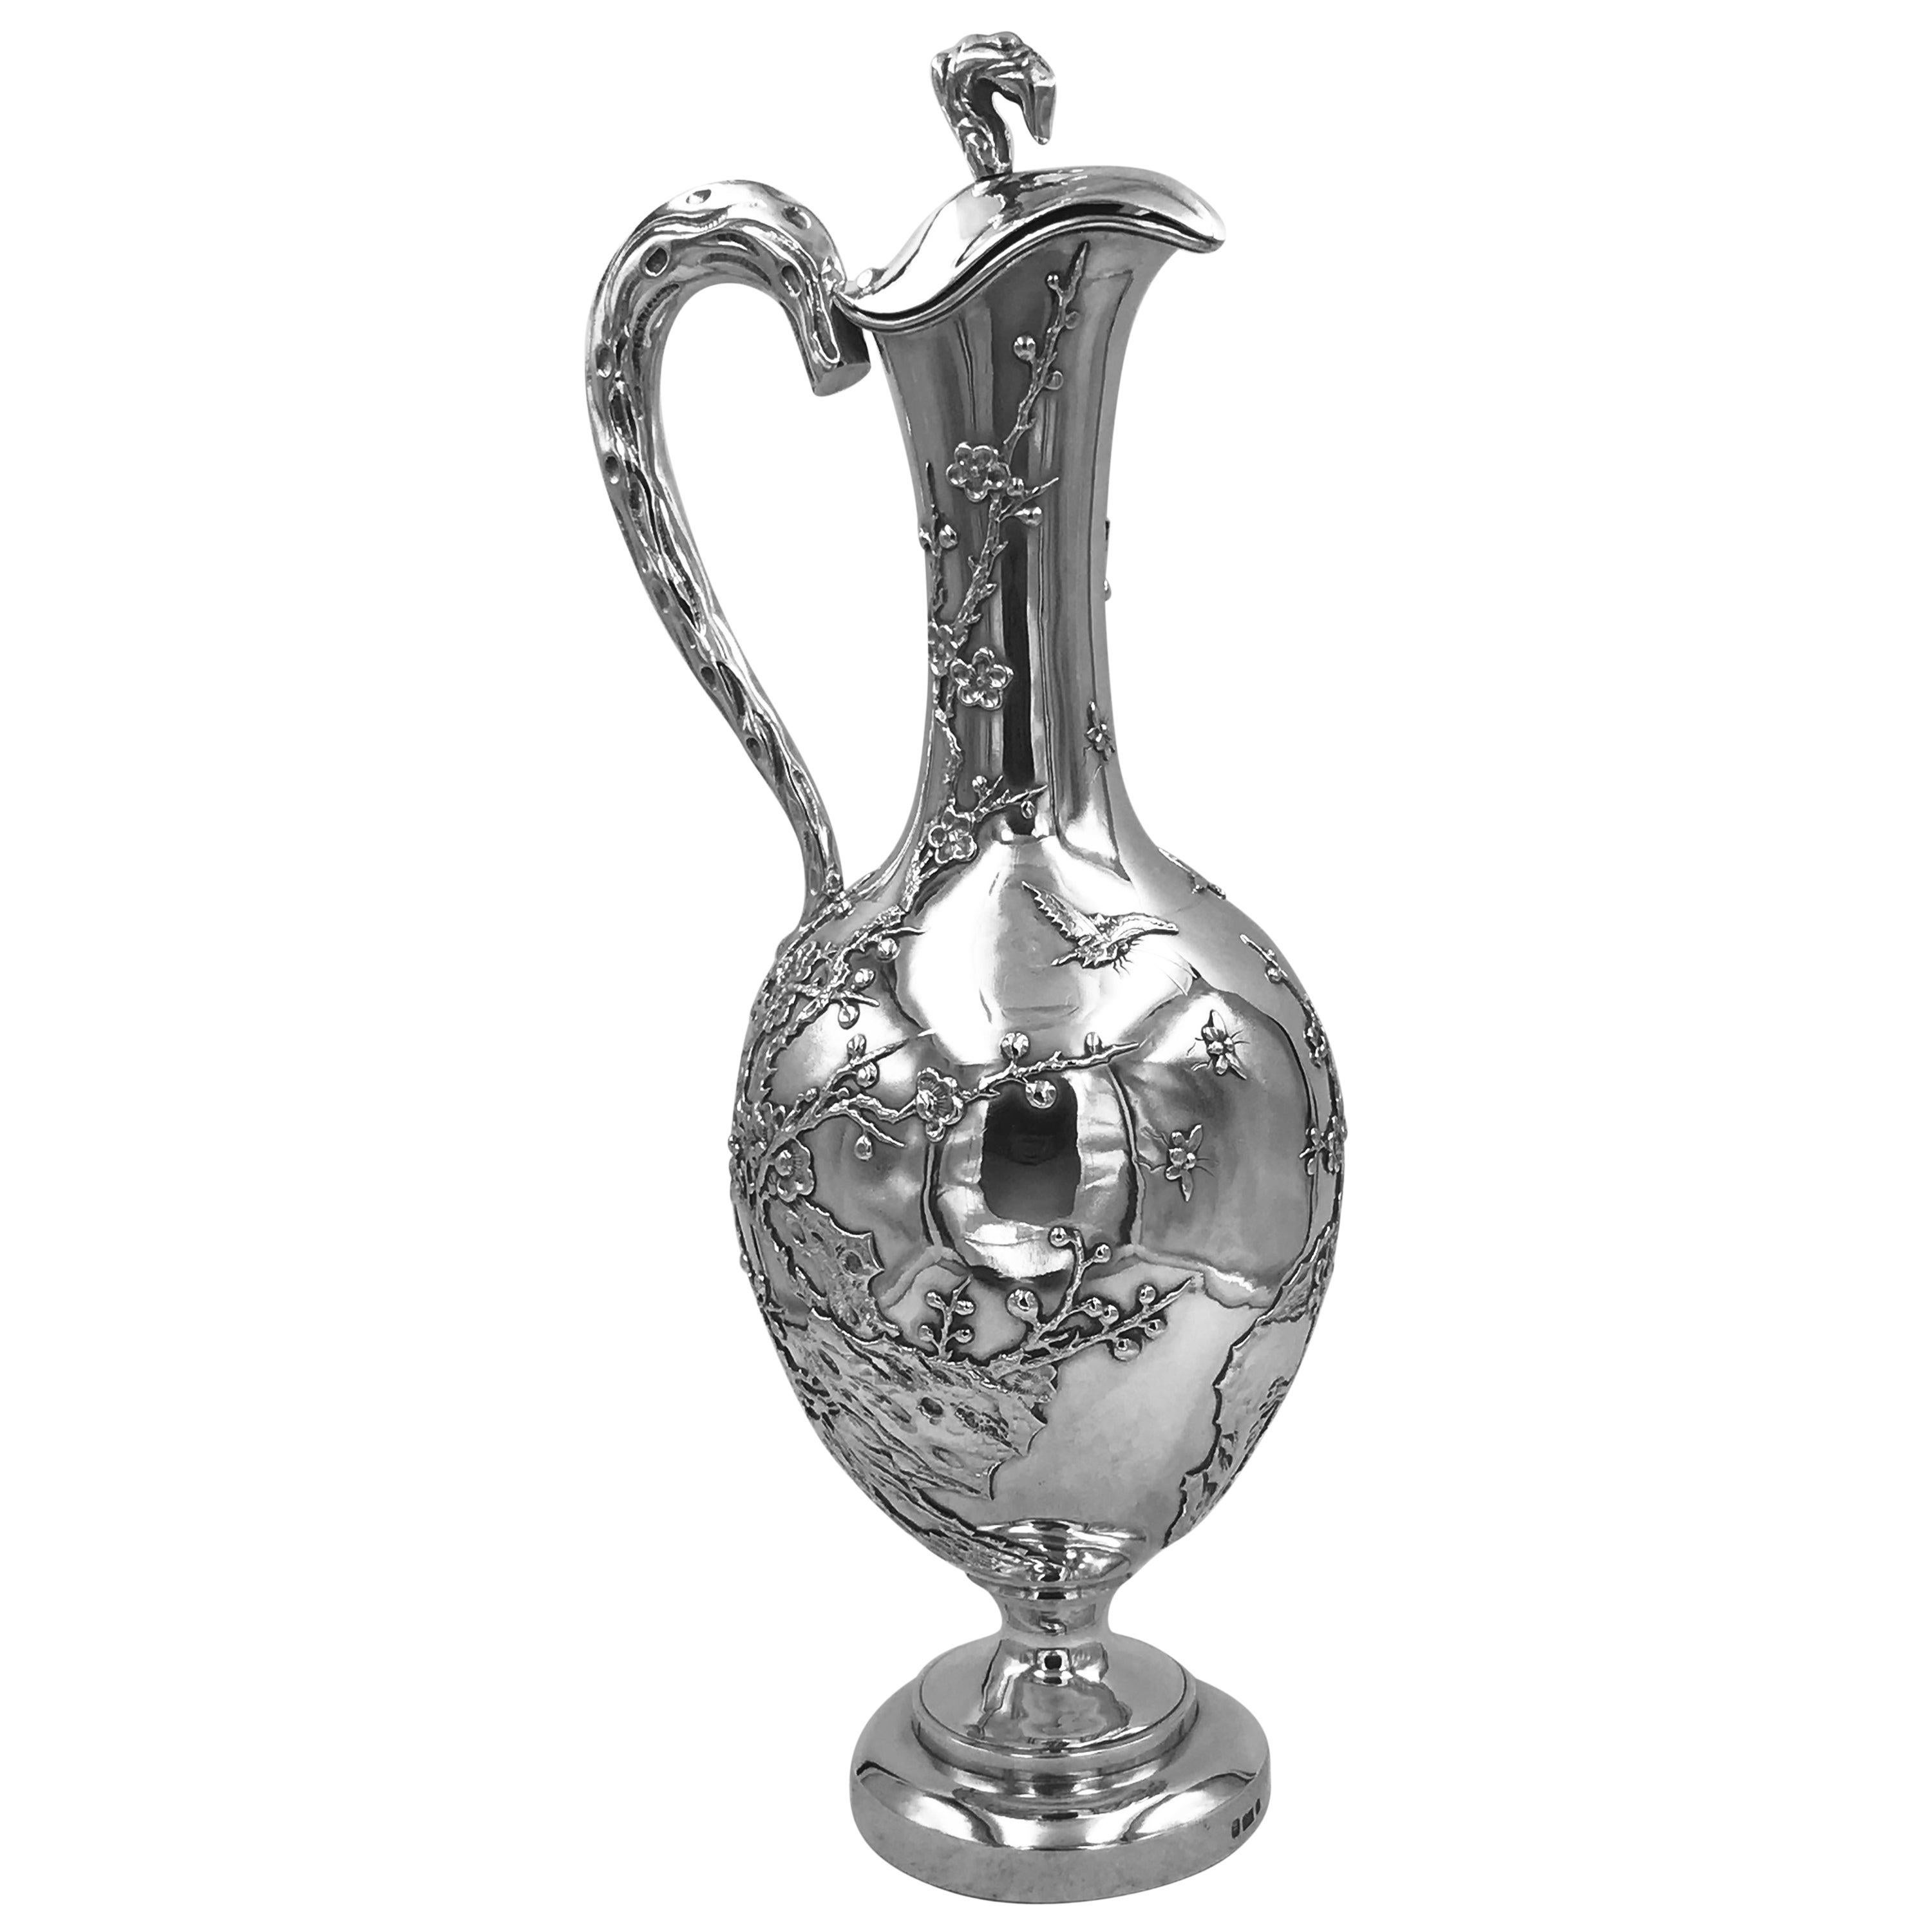 Chinese Export Silver Jug or Ewer, profusely decorated with applied bamboo and moths on a plain background. It has a hinged lid, round collet foot, and the handle and finial are formed as sections of branch. Marked with WH, for Wang Hing  '宏兴‘ which